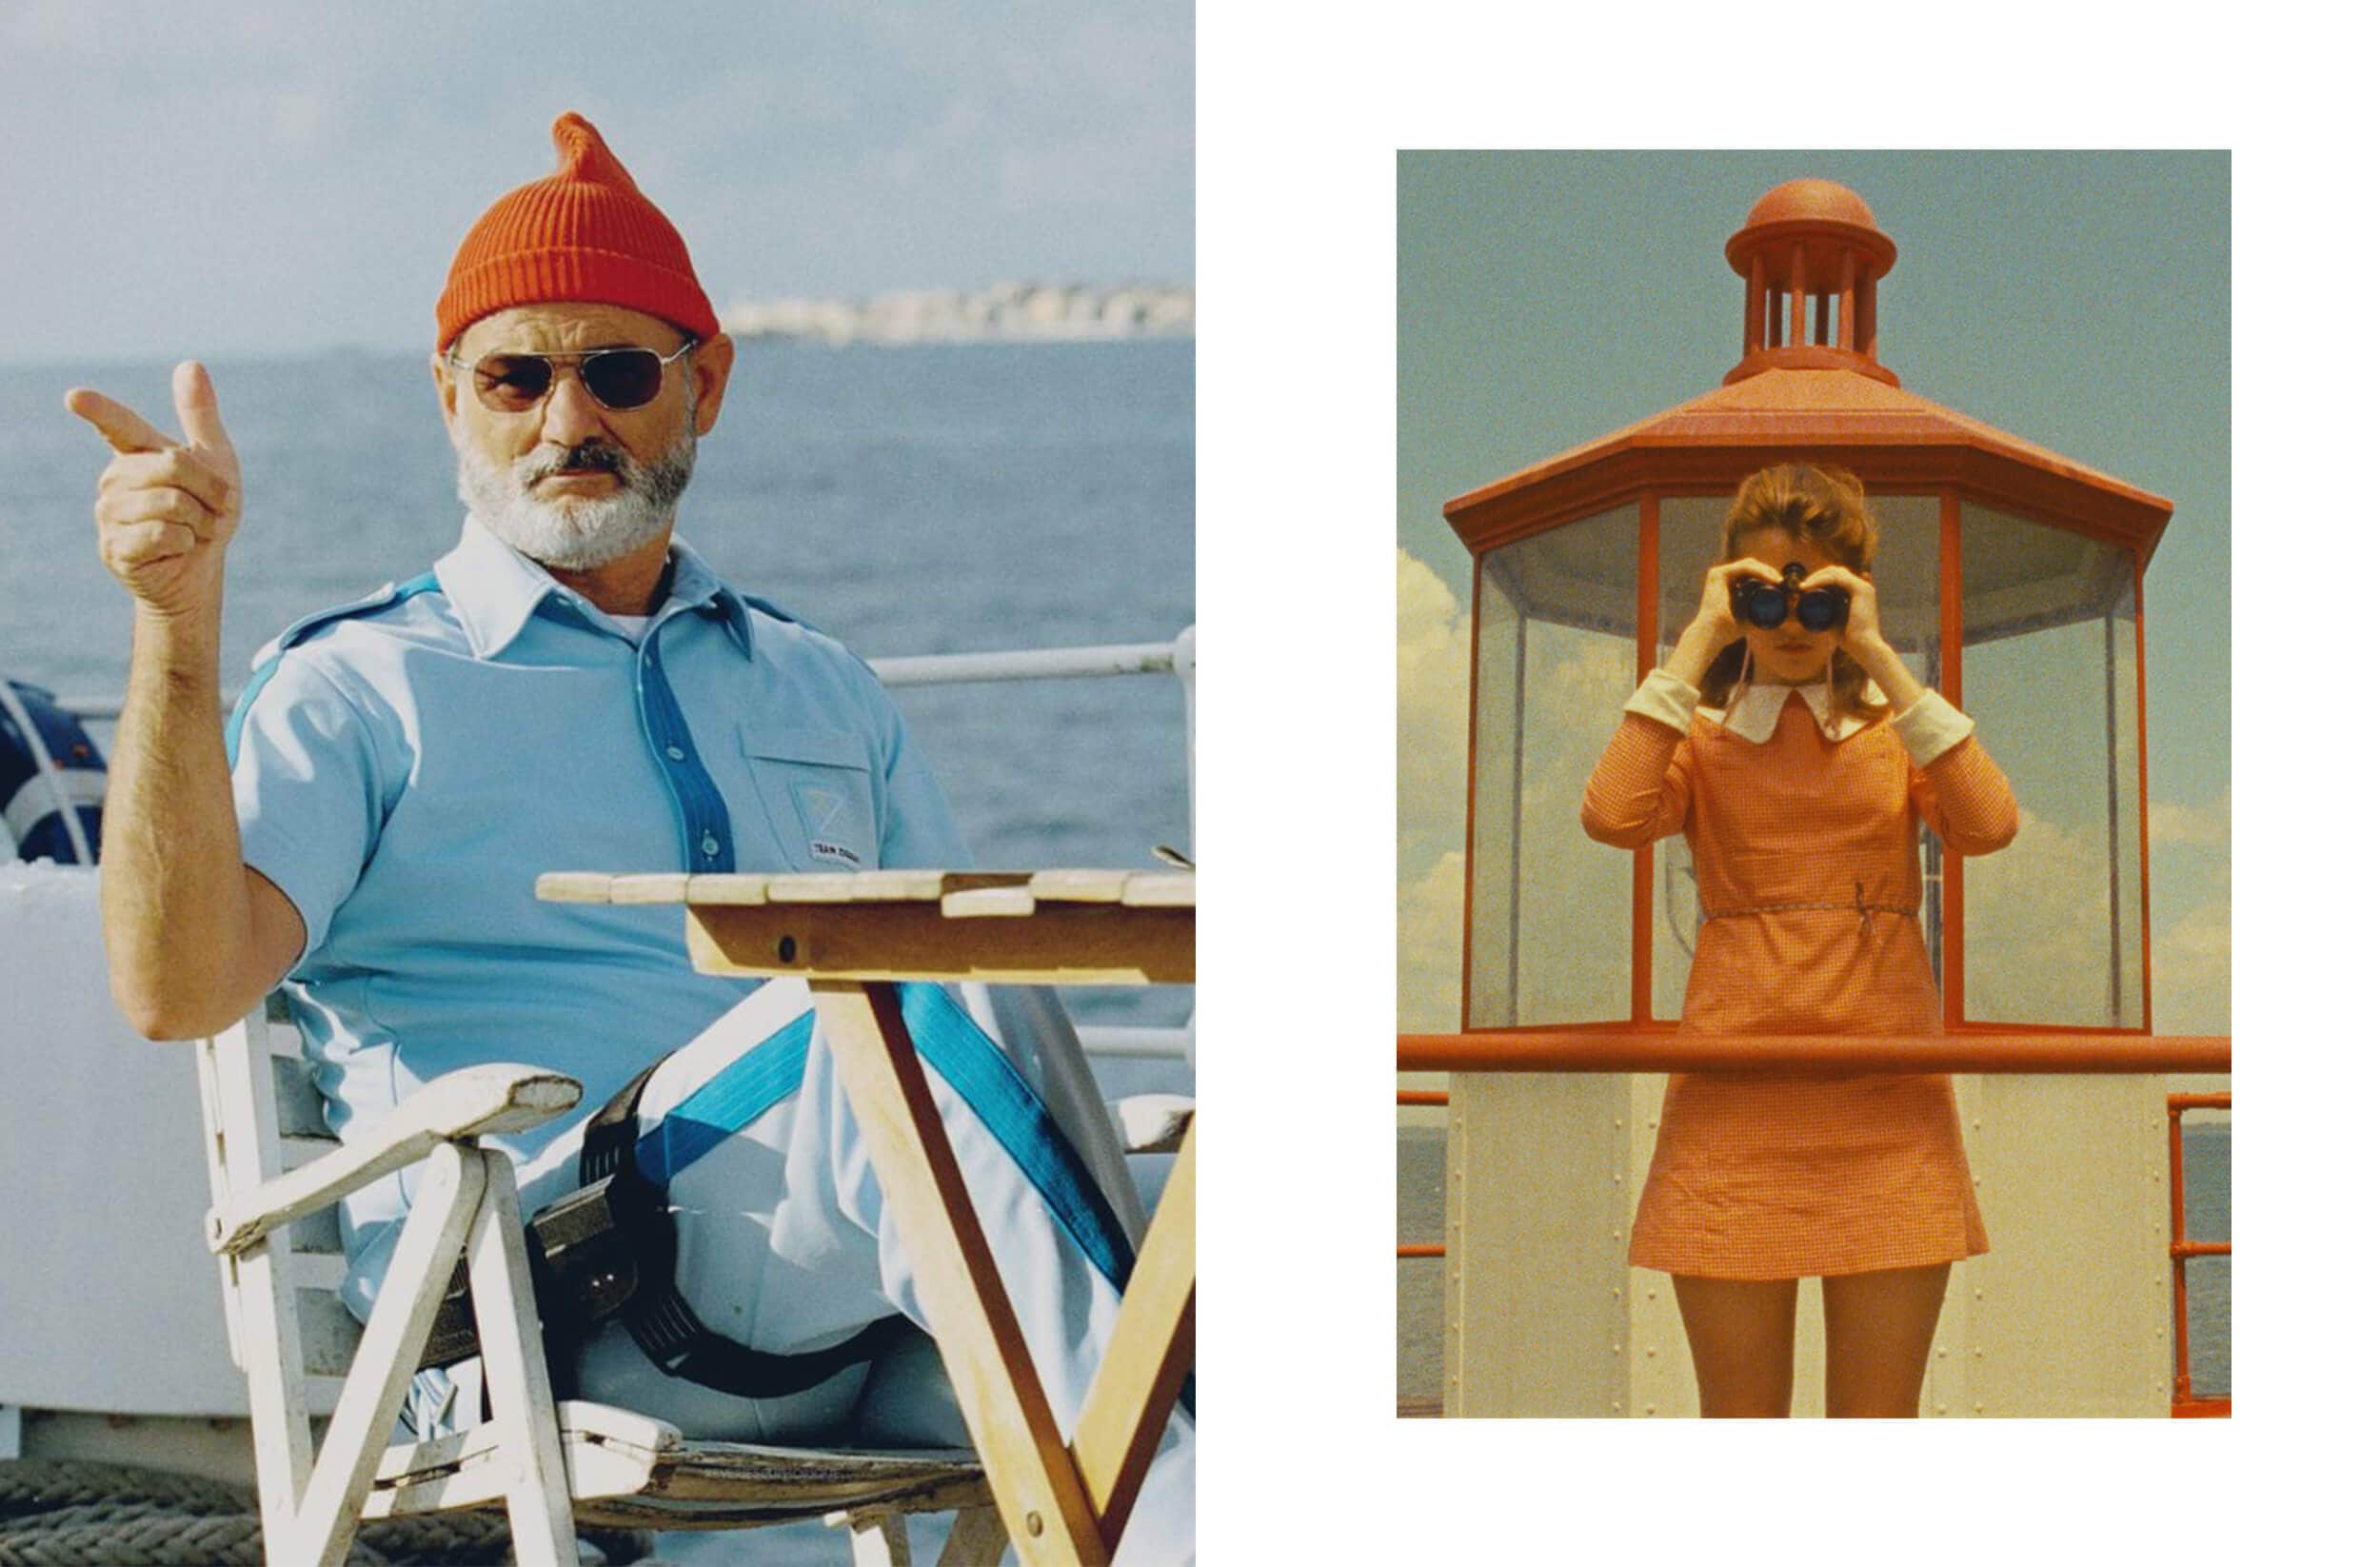 wes anderson style